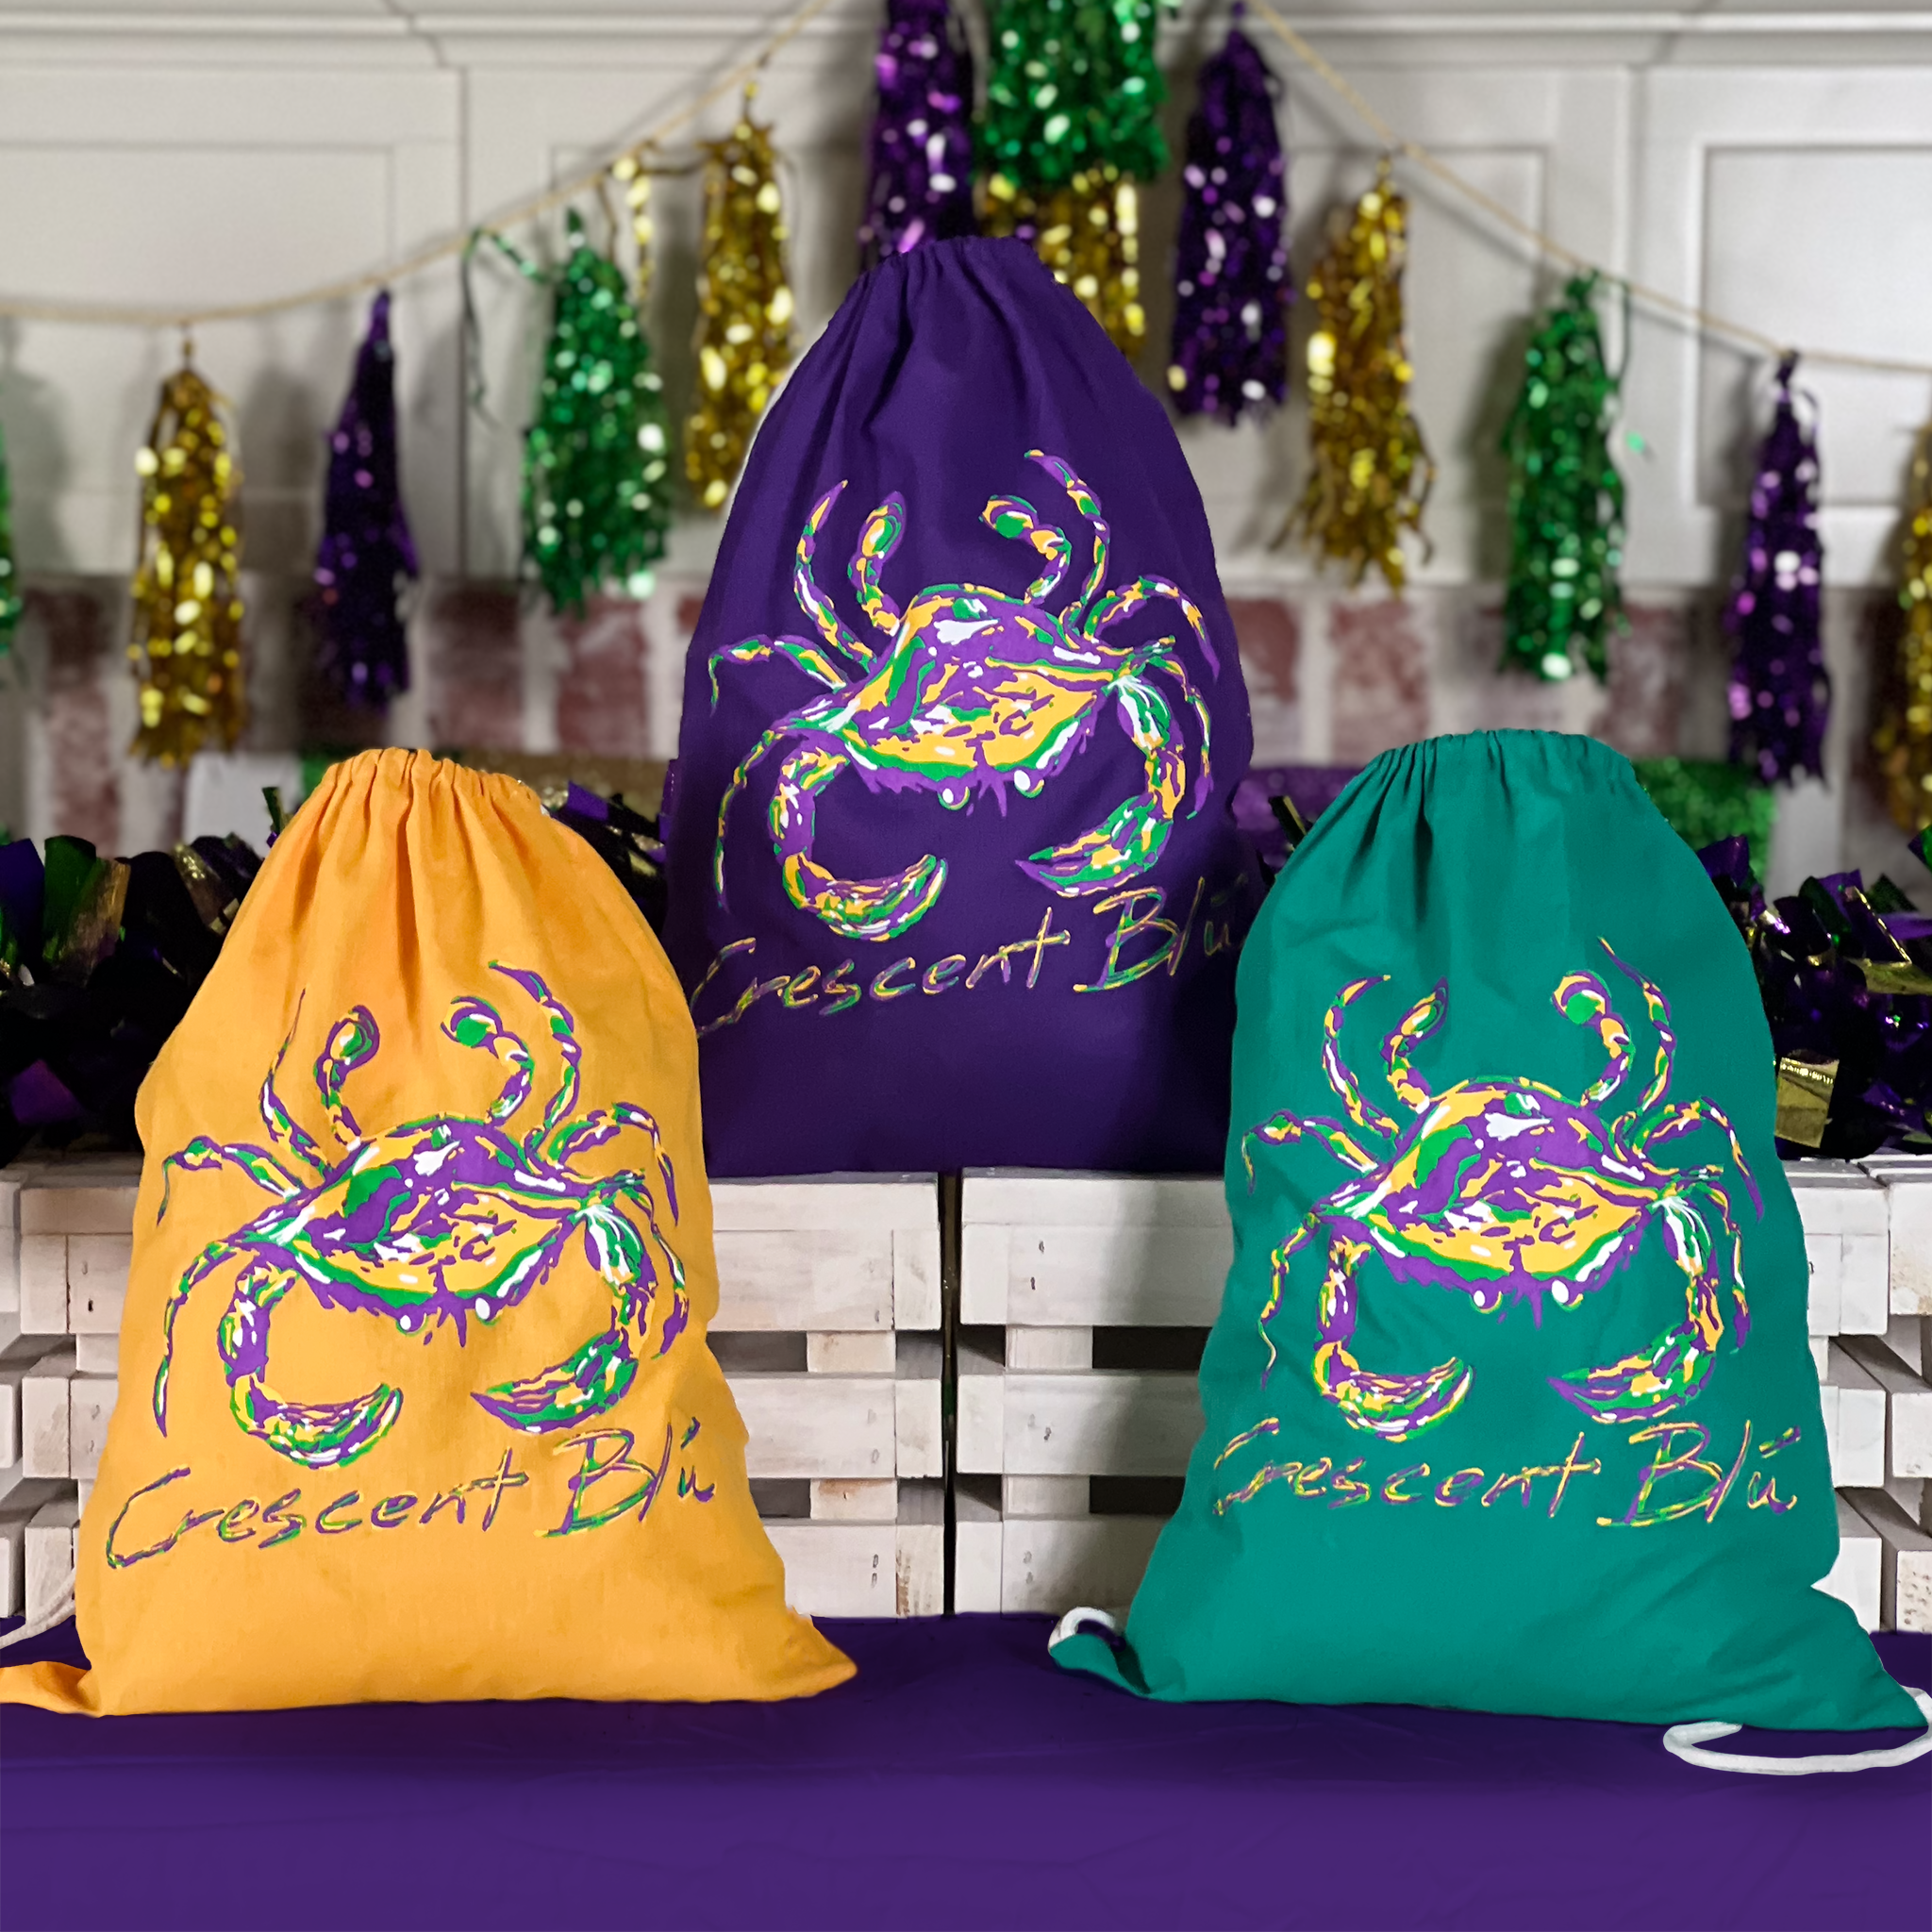 Three Mardi Gras Crab cinch sack-style  backpacks, a gold and green on a purple table and a purple backpack on white crates with  Mardi Gras tinsel hung above a fireplace.